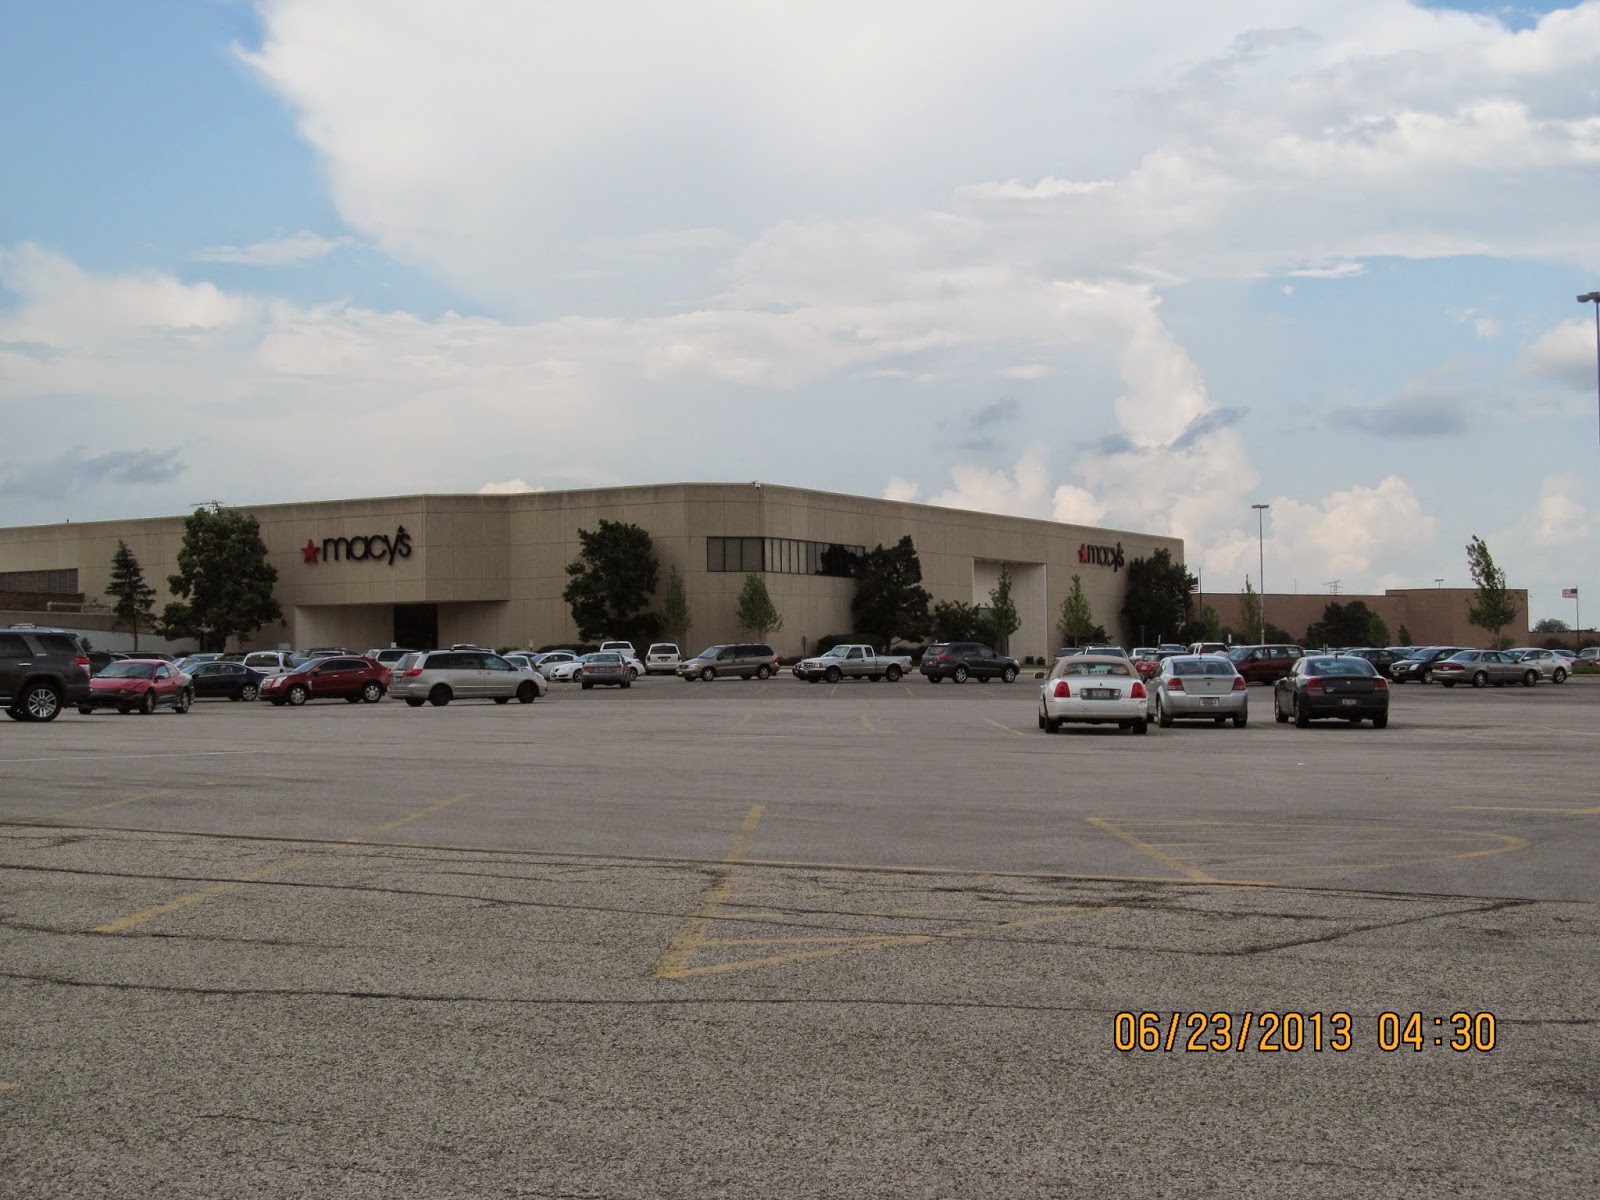 Trip to the Mall: Spring Hill Mall- (West Dundee, IL)